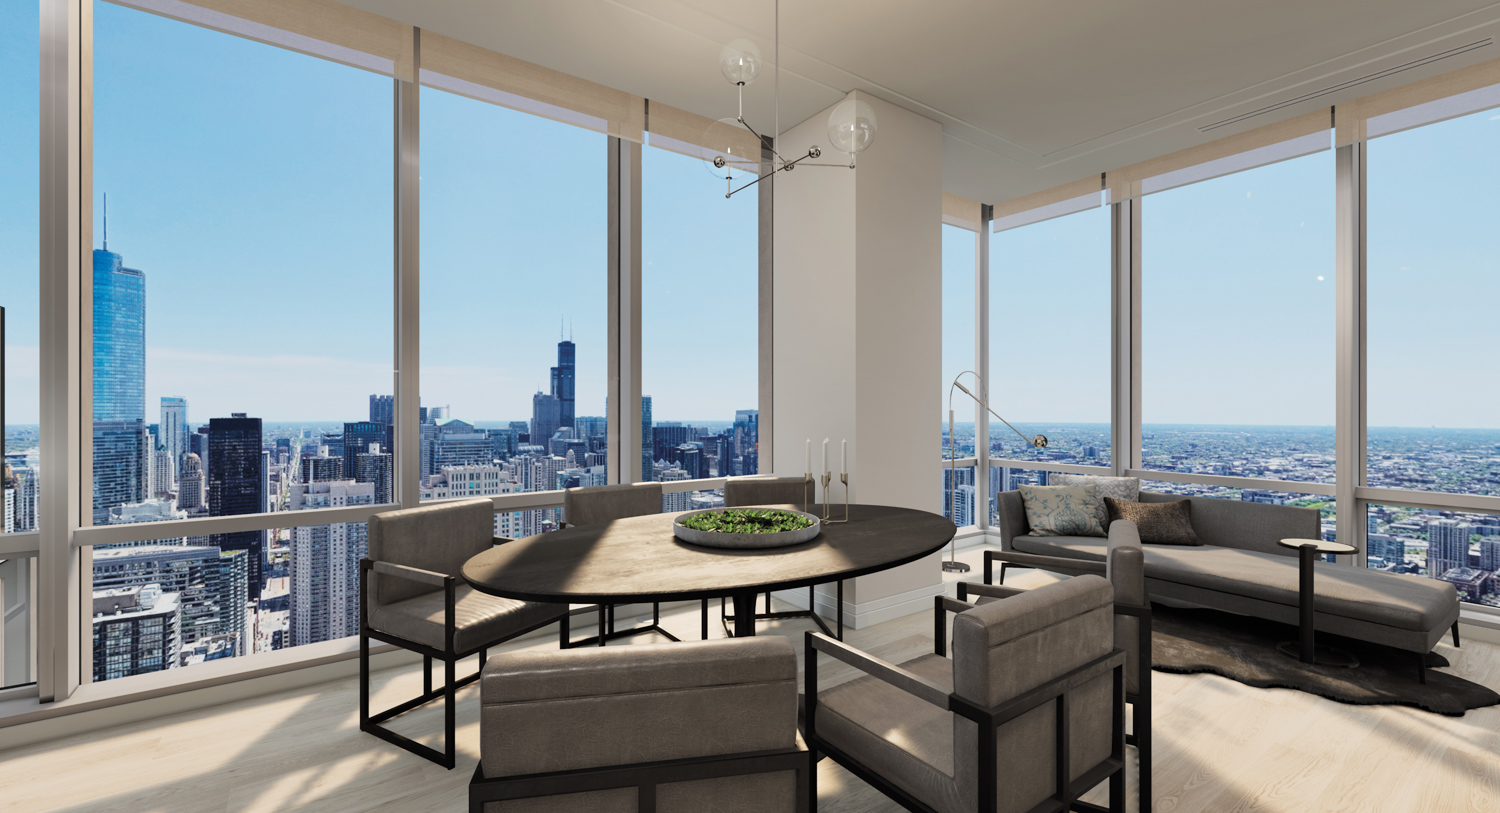 Rendering of a dining room in a high-rise building overlooking the city.